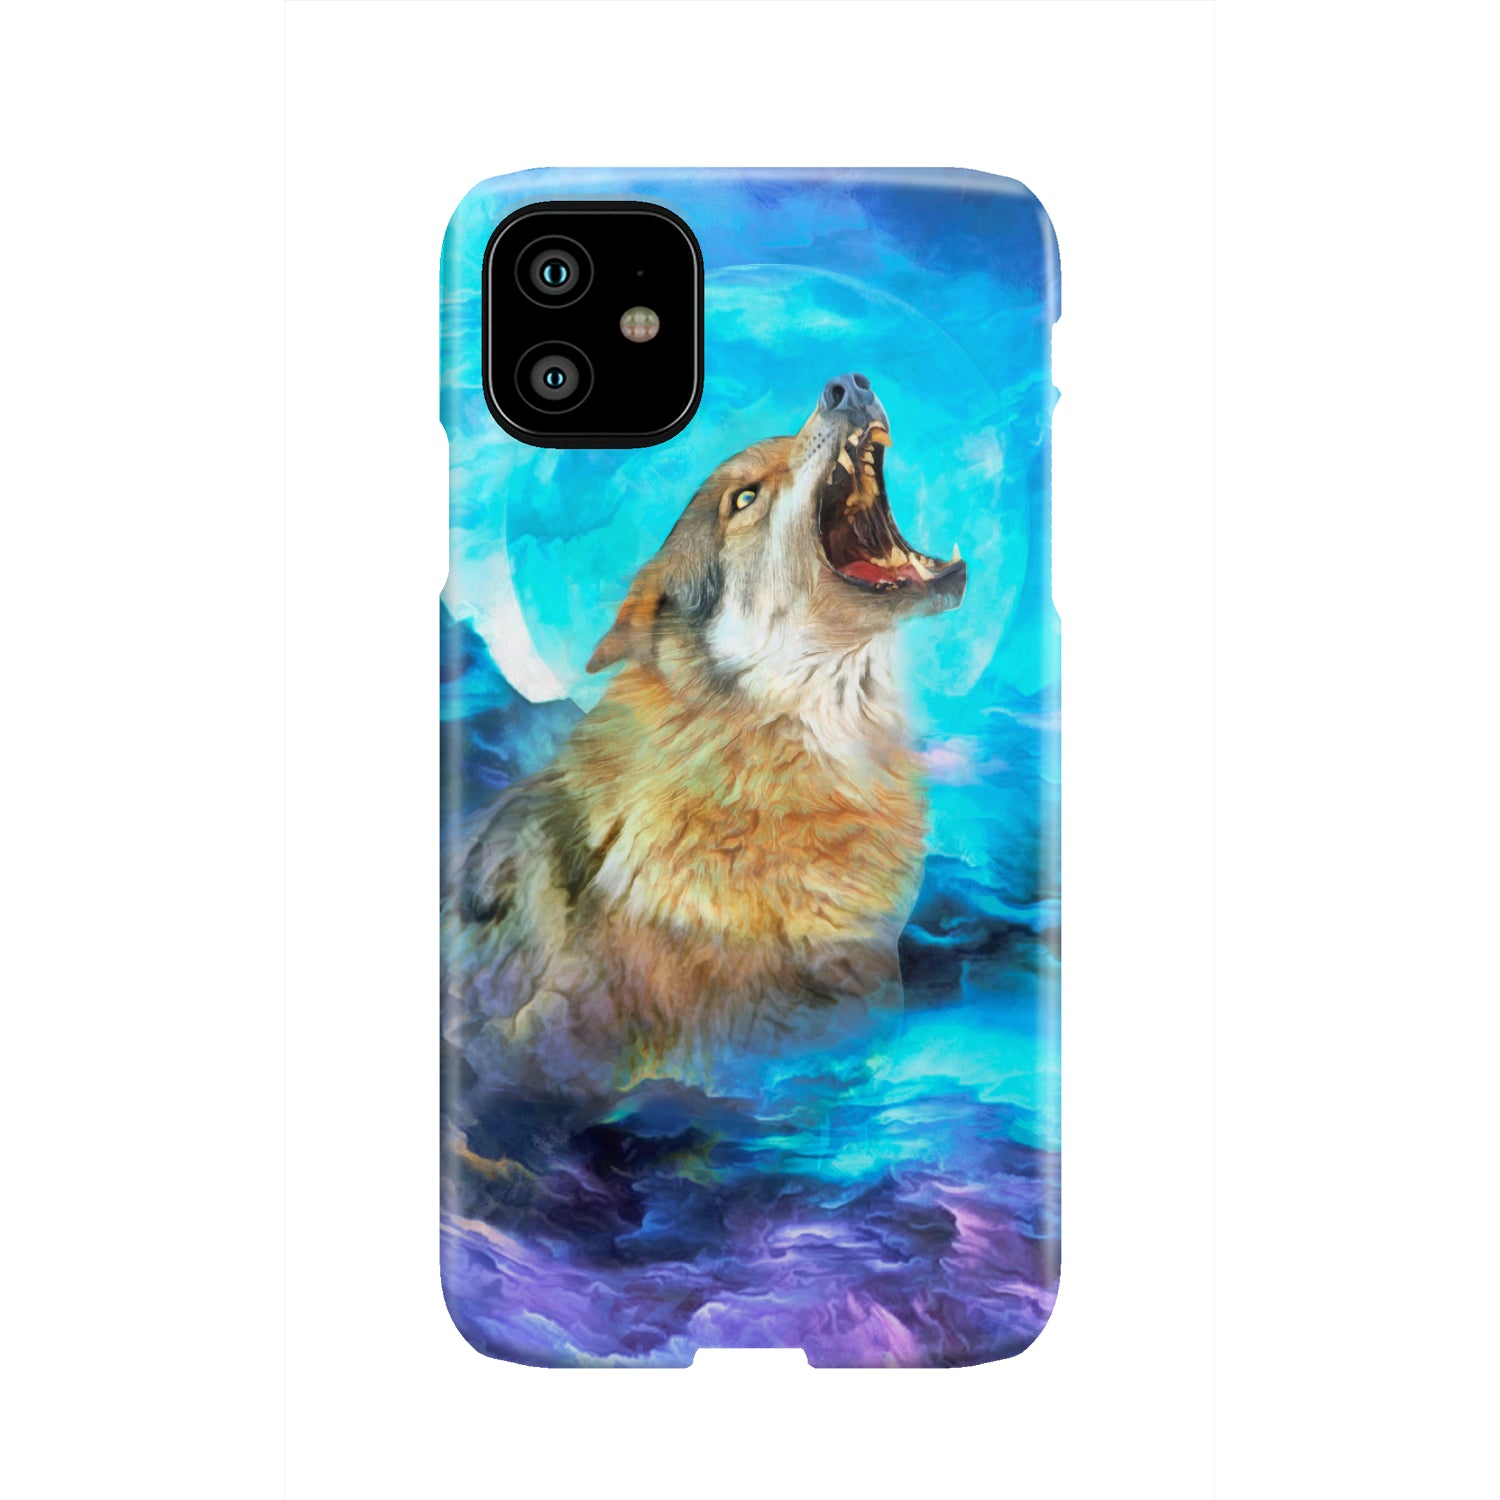 Powwow Store gb nat00422 howling wolf blue moon native phone case